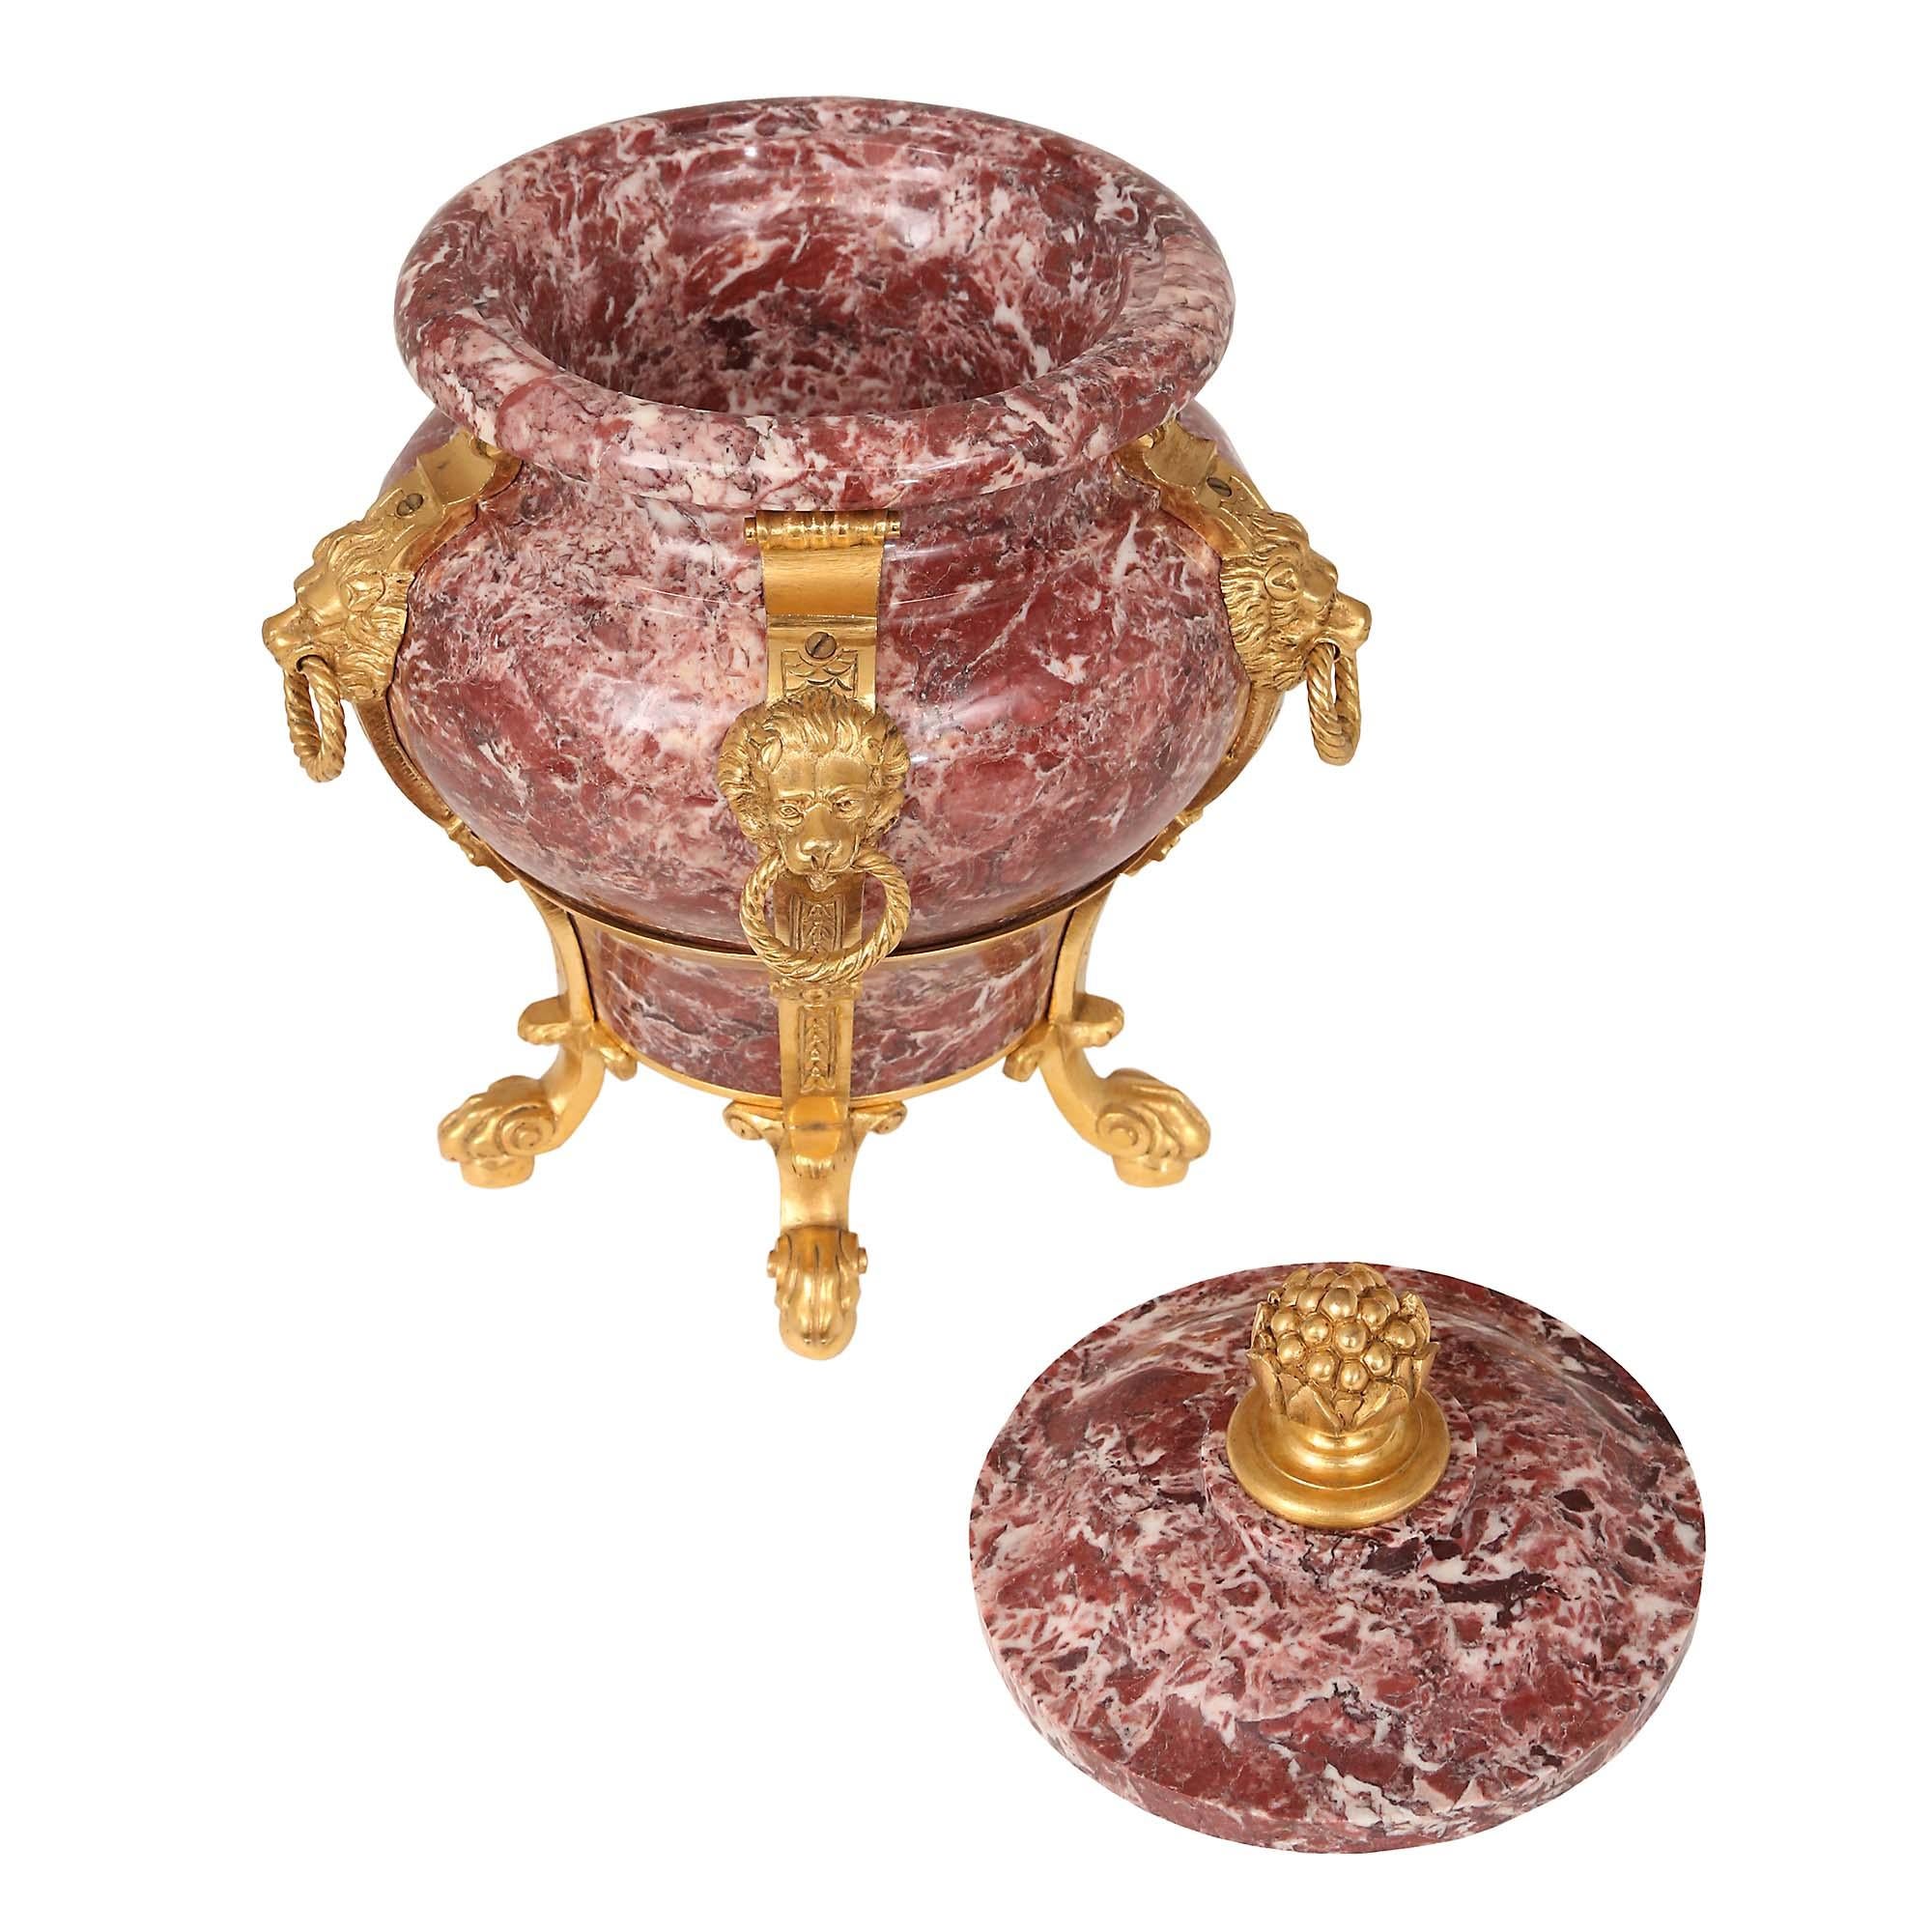 Pair Of French 19th Century Neo-Classical St. Rose Marble And Ormolu Urns In Good Condition For Sale In West Palm Beach, FL